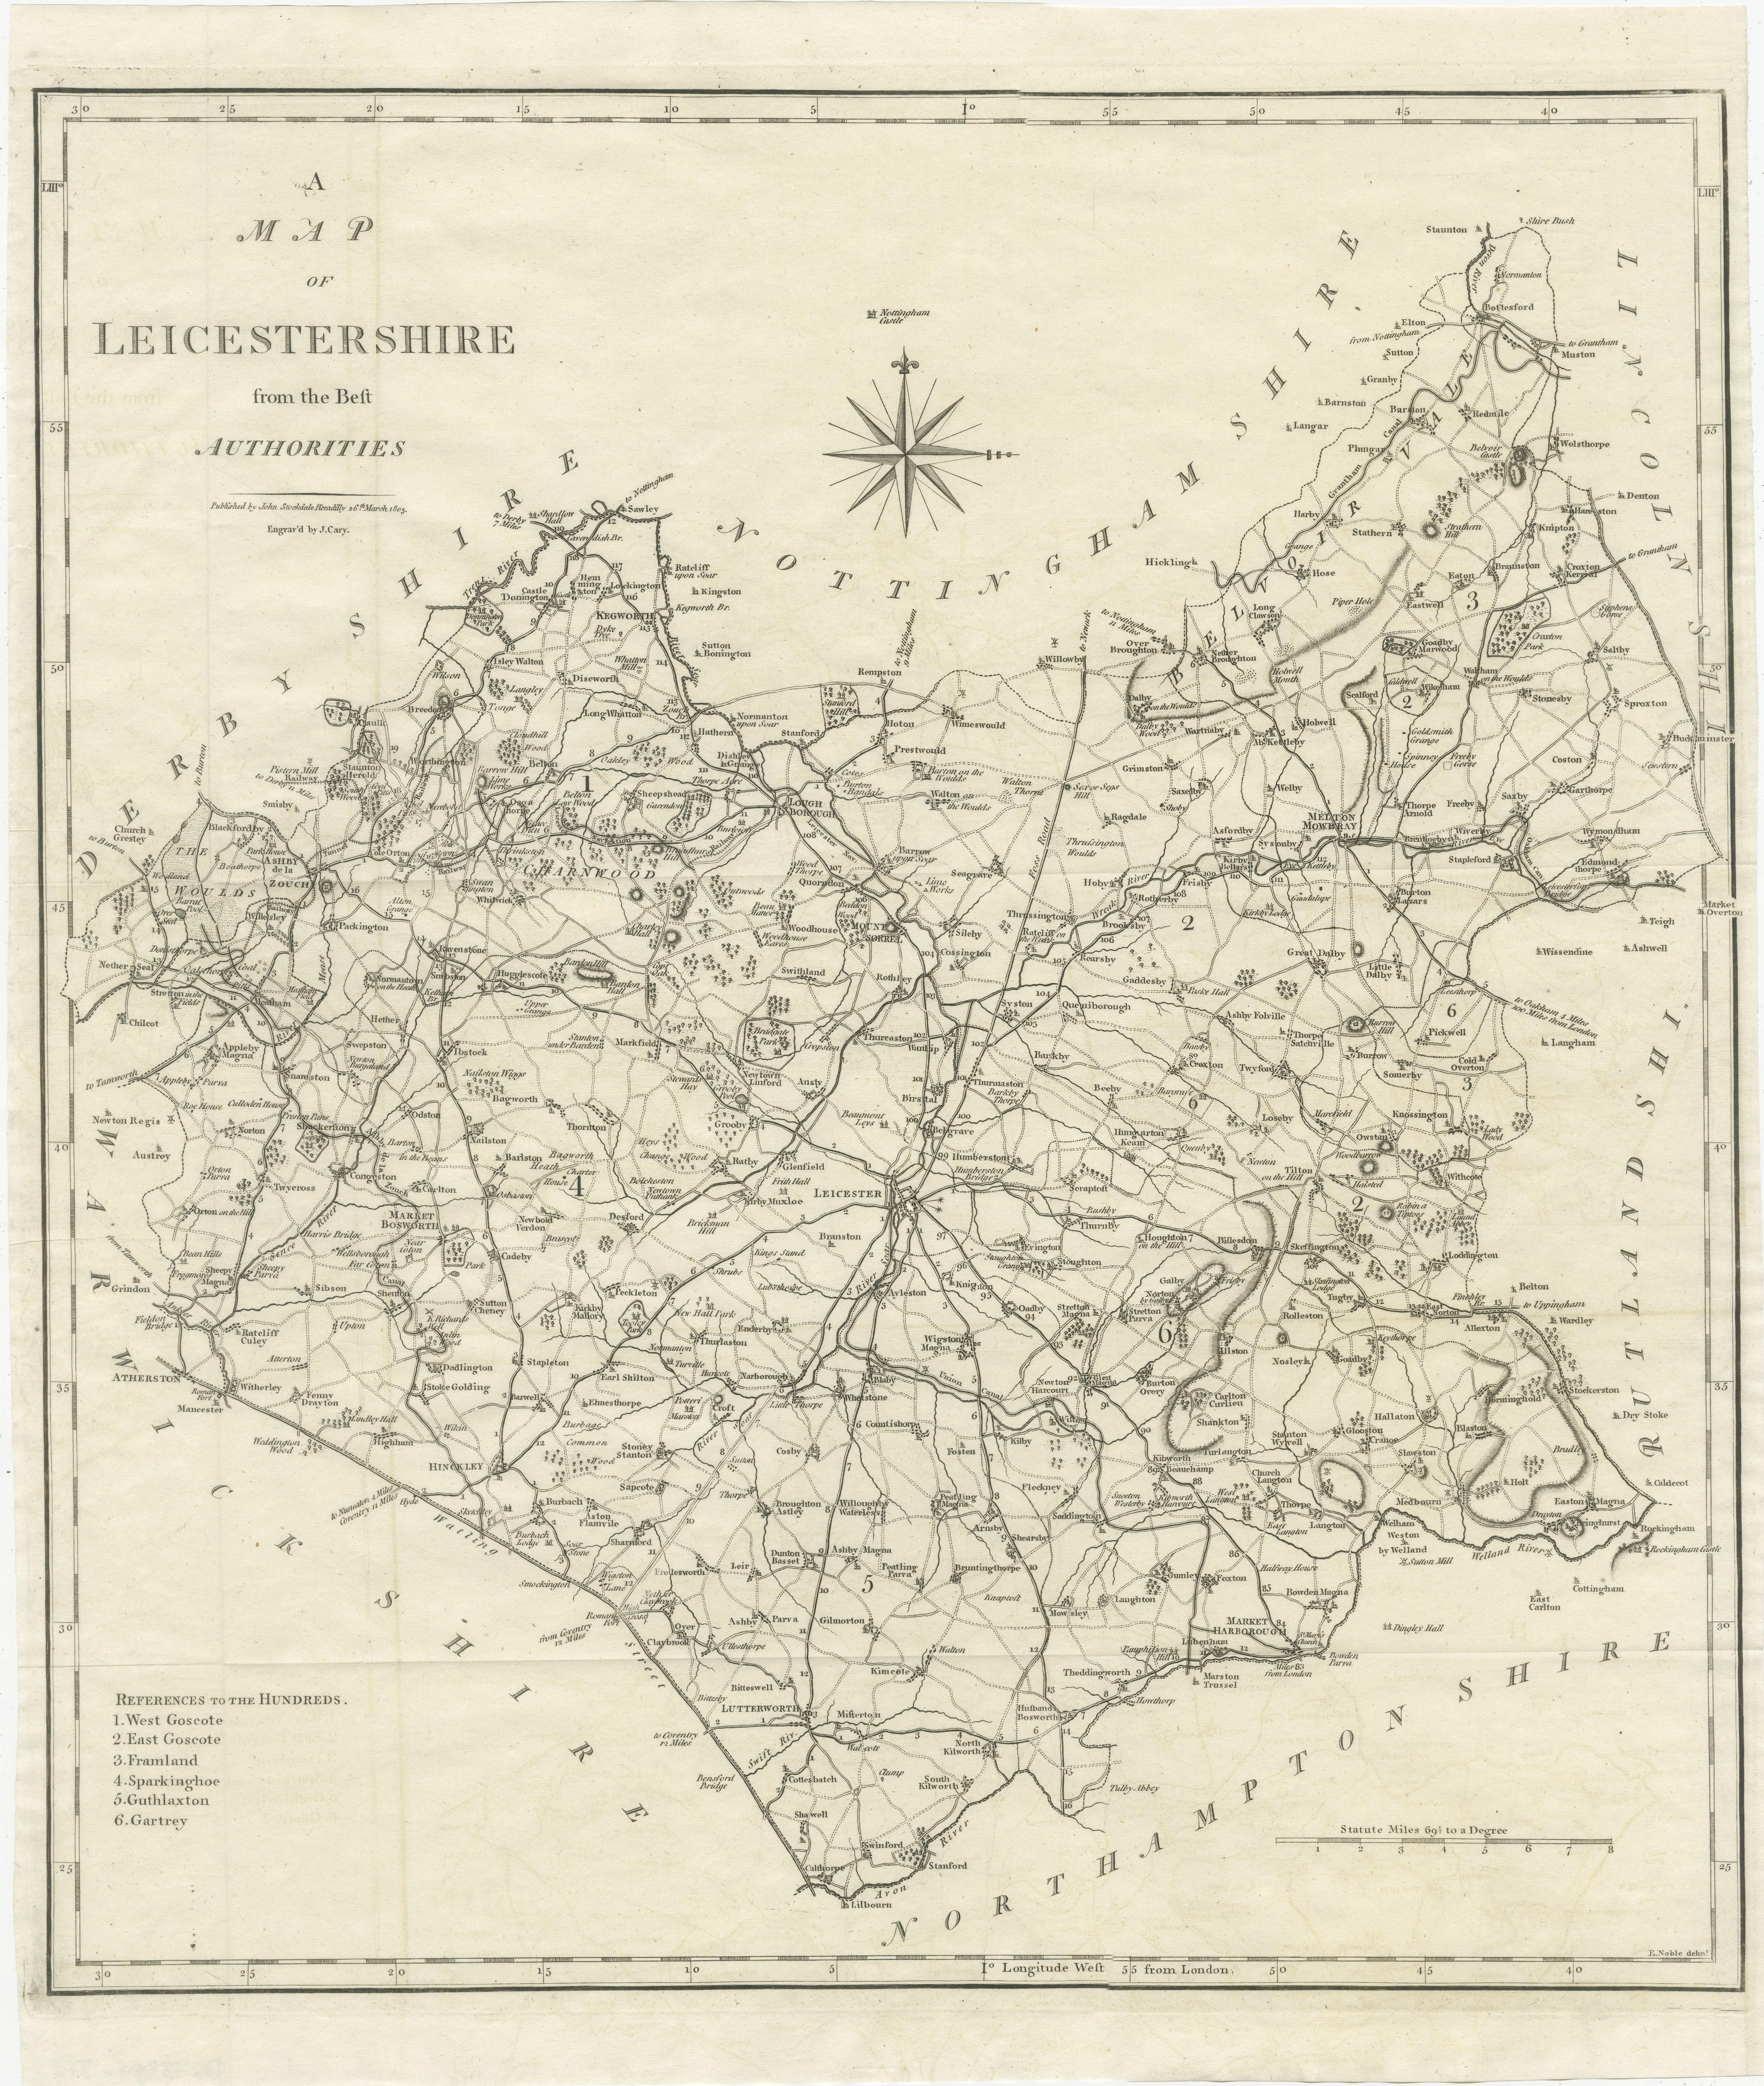 Explore Leicestershire's Past: Antique Map by John Cary

Step into the history of Leicestershire, England, with this original old county map engraved by the renowned cartographer John Cary. Titled 'A Map of Leicestershire from the best Authorities,'